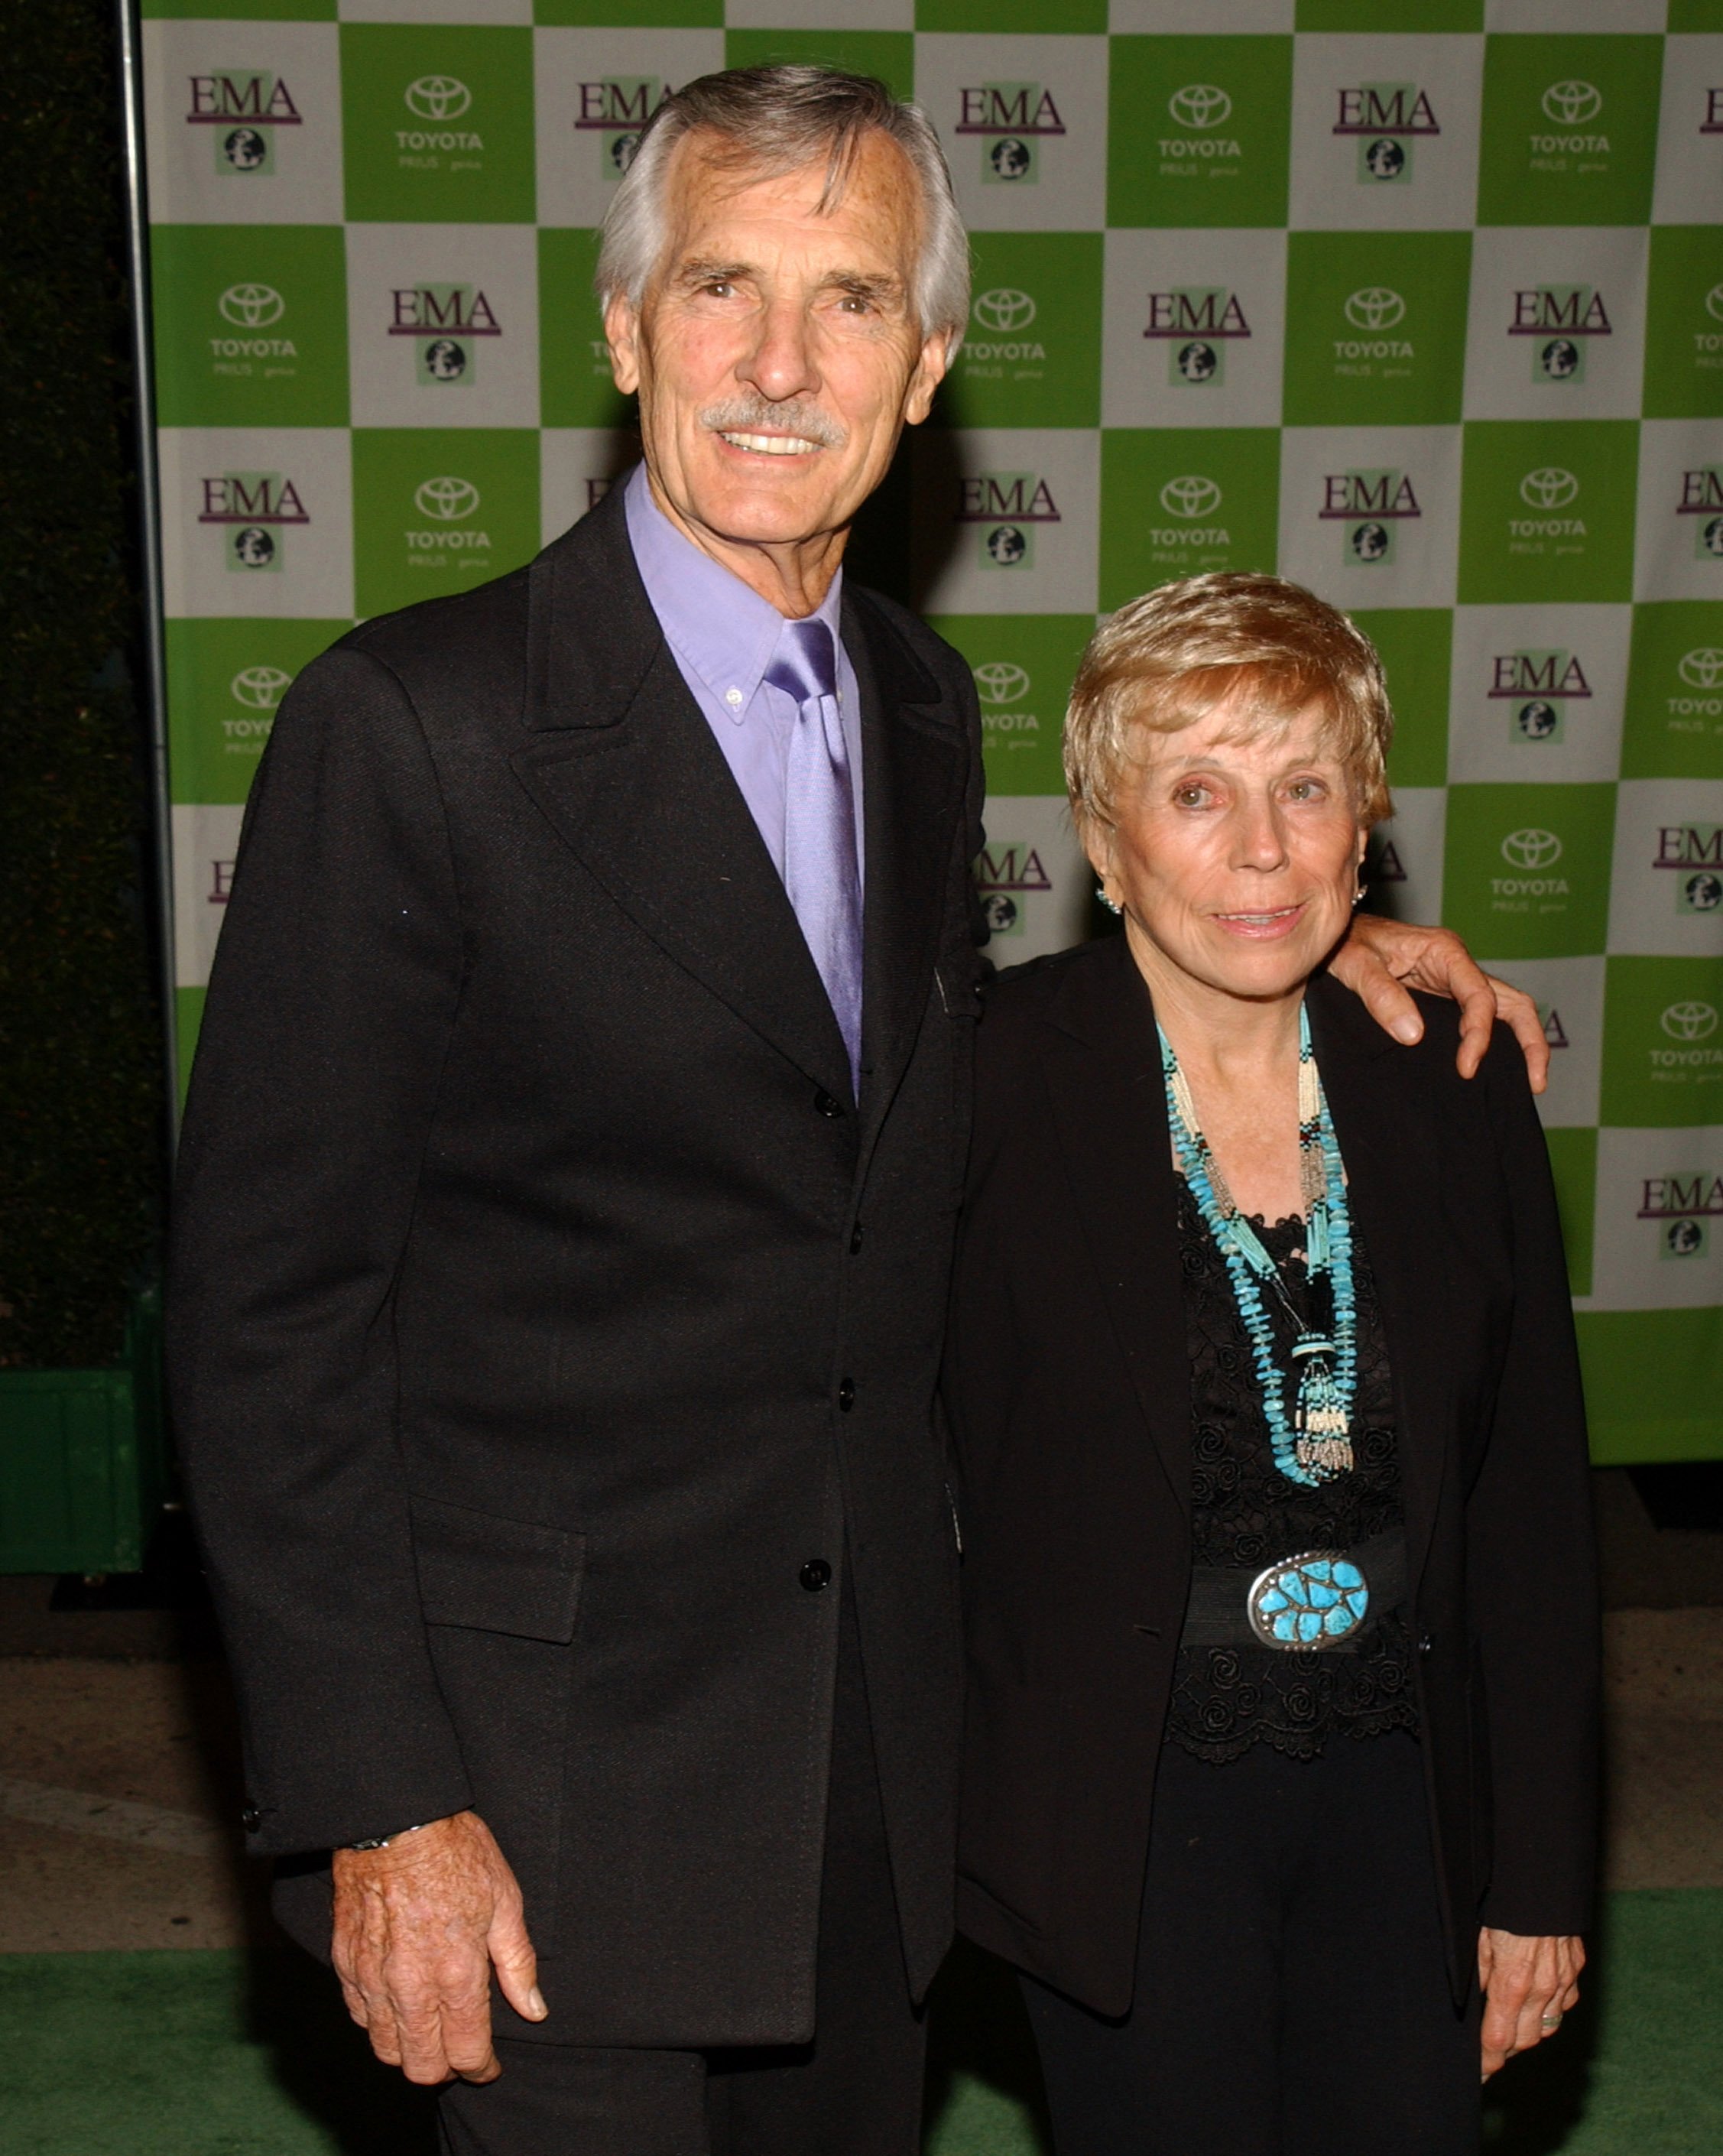 Dennis Weaver and wife Gerry during 13th Annual Environmental Media Awards at The Ebell Theatre in Los Angeles, California | Photo: Jean-Paul Aussenard/WireImage via Getty Images